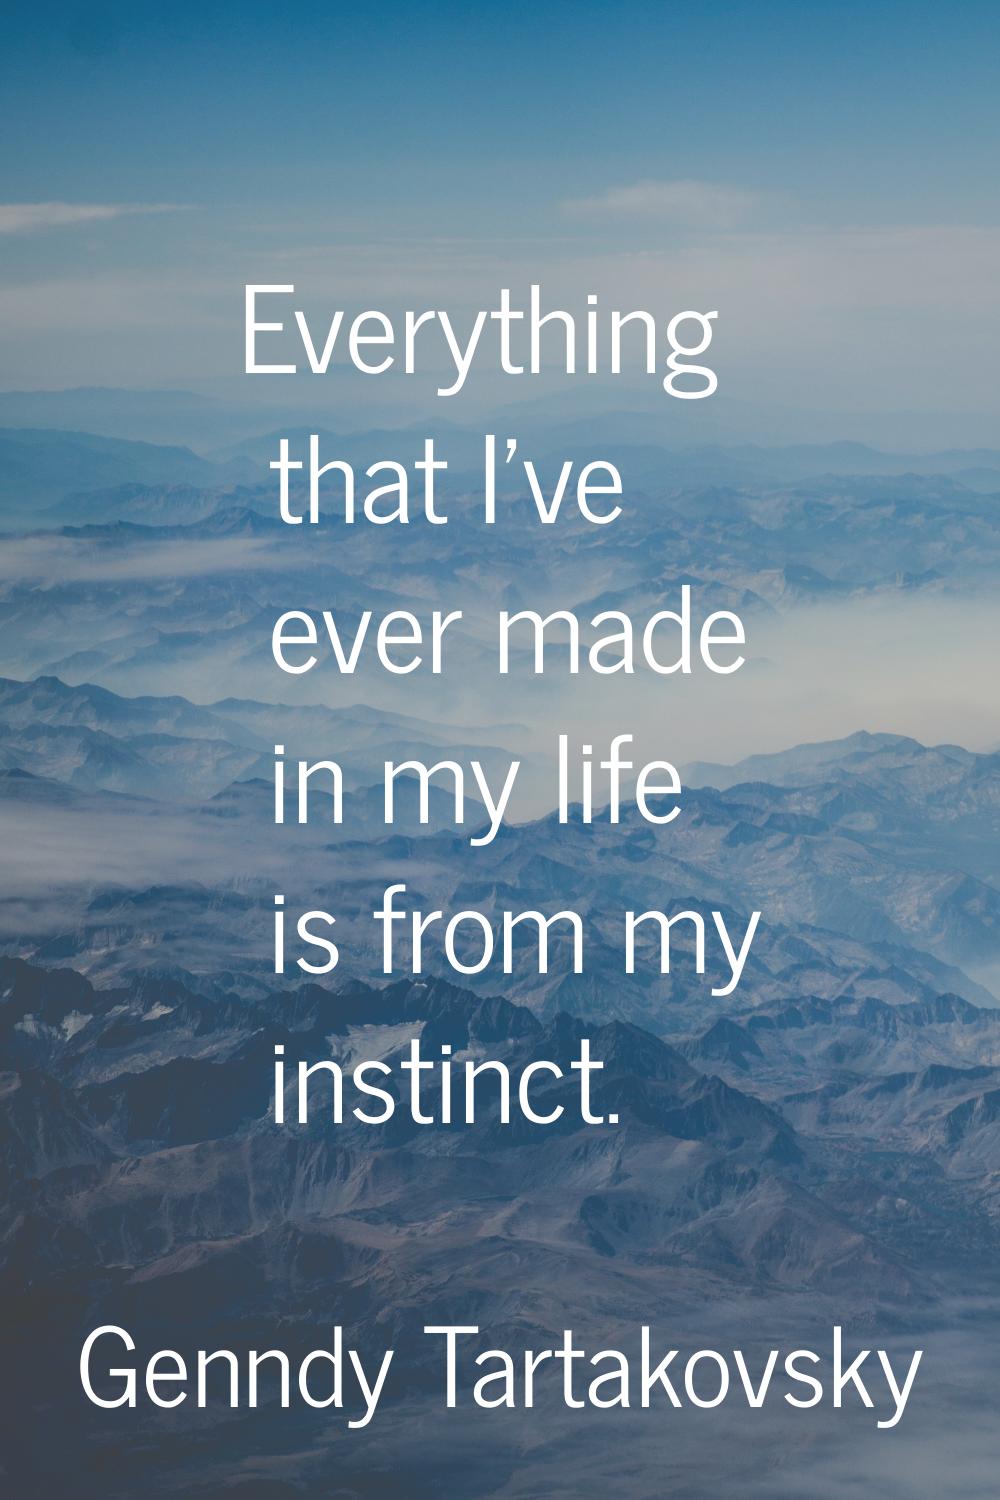 Everything that I've ever made in my life is from my instinct.